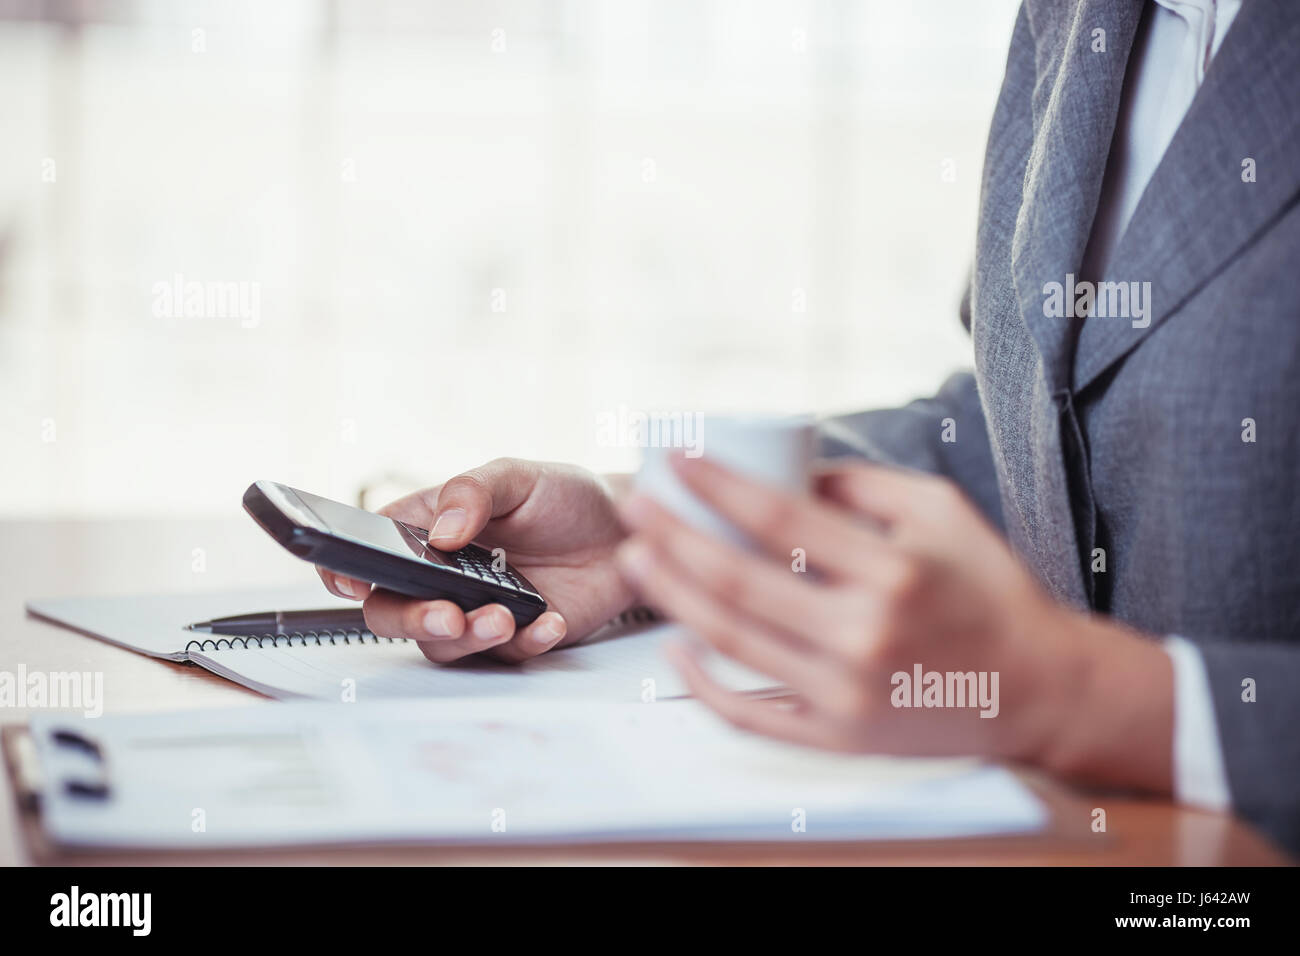 Businesswoman surf internet on smartphone and holding coffee cub Stock Photo